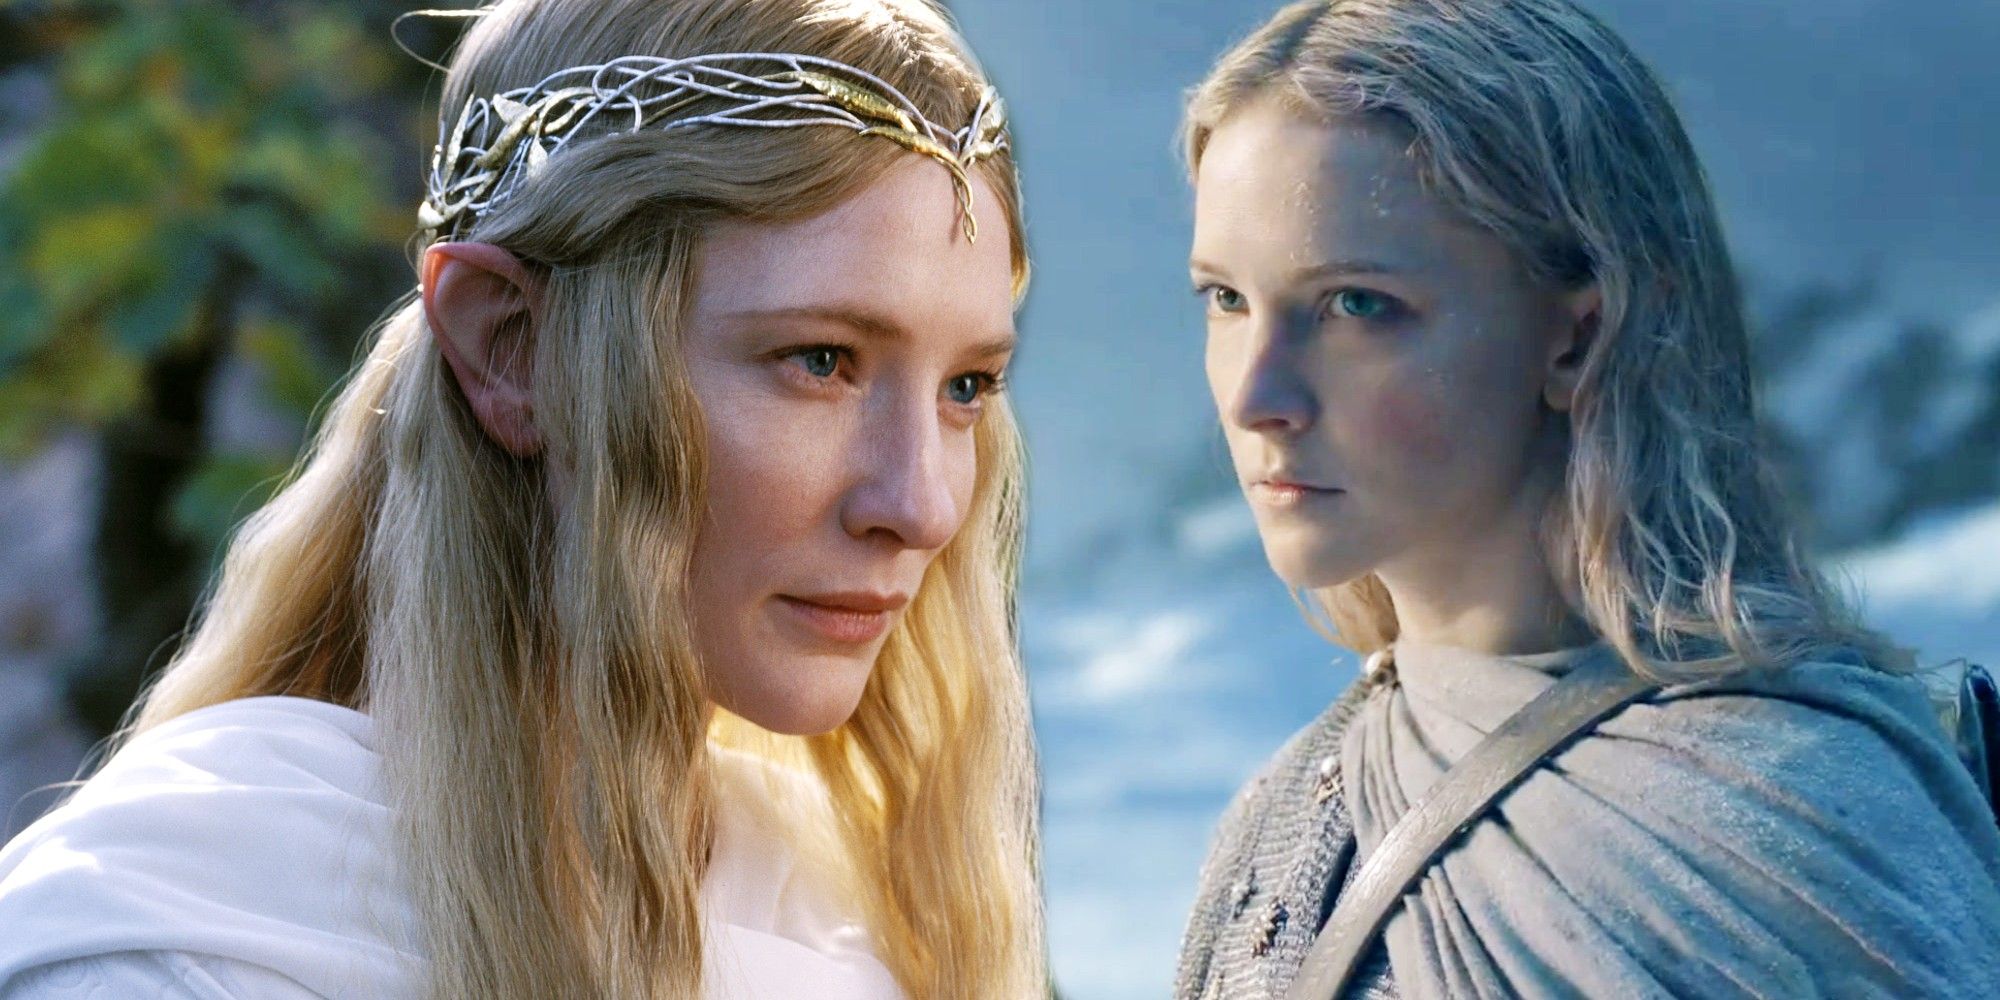 The Lord of the Rings: The Rings of Power gives Galadriel and